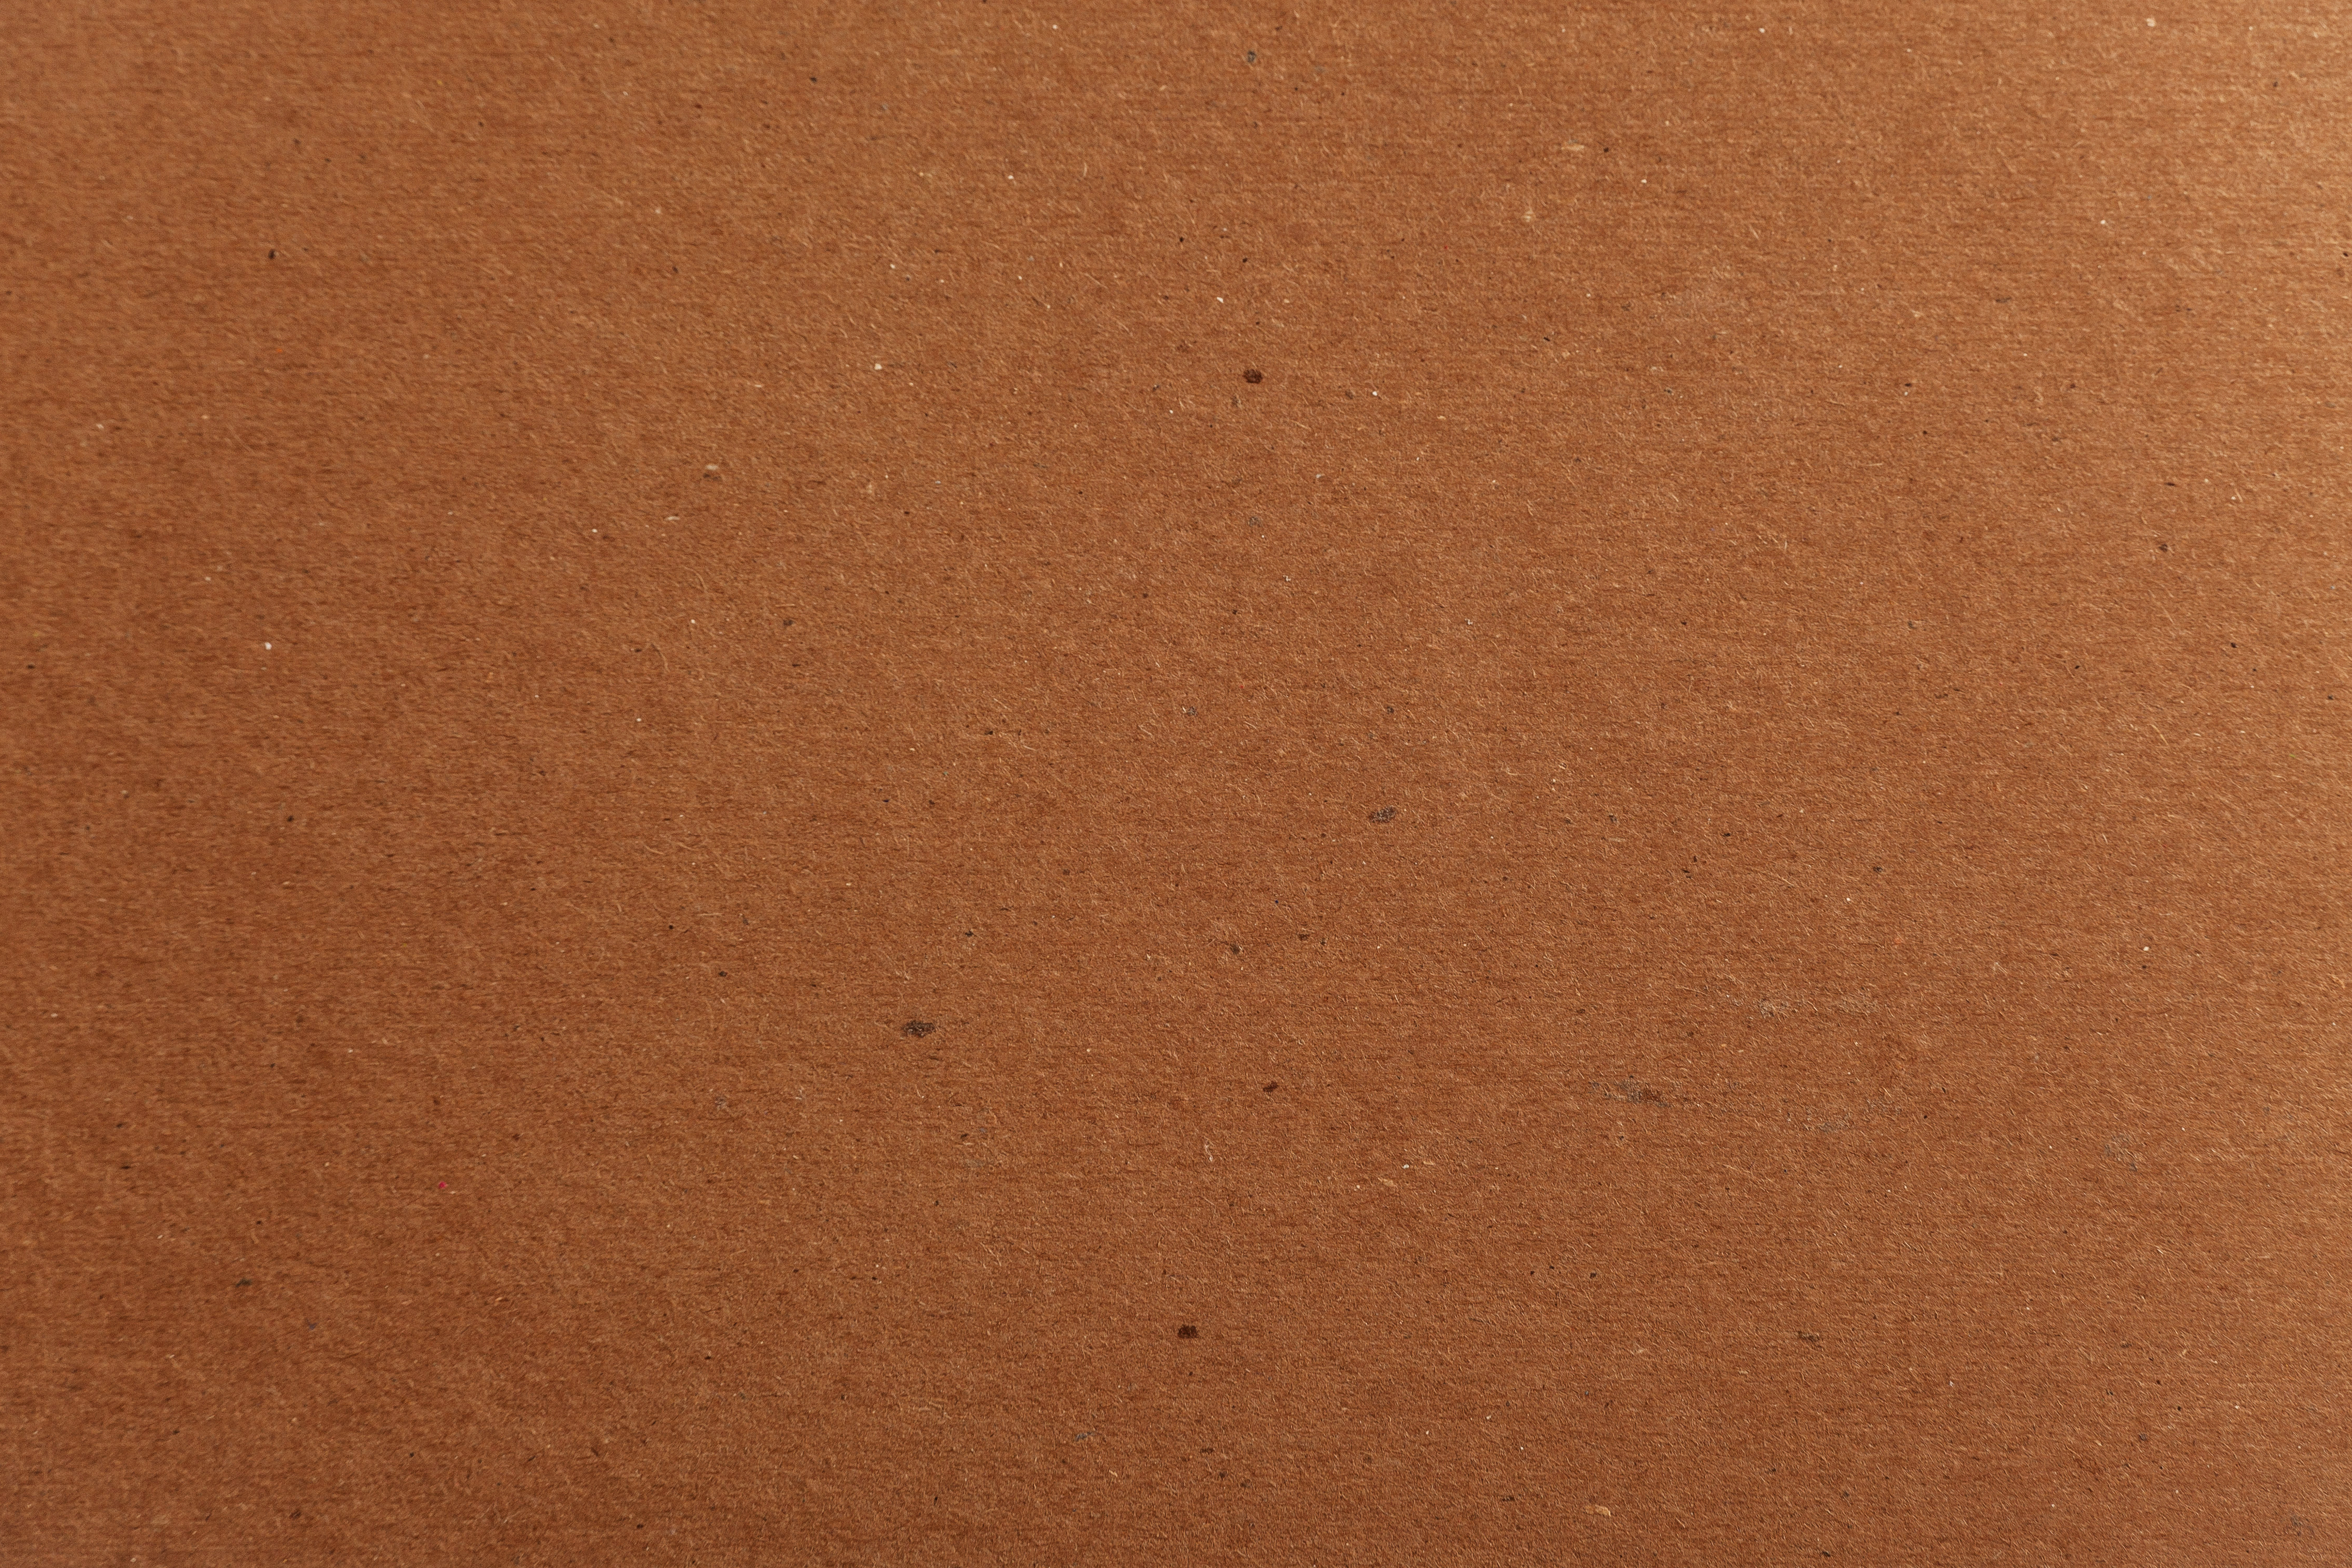 Brown paper texture photo